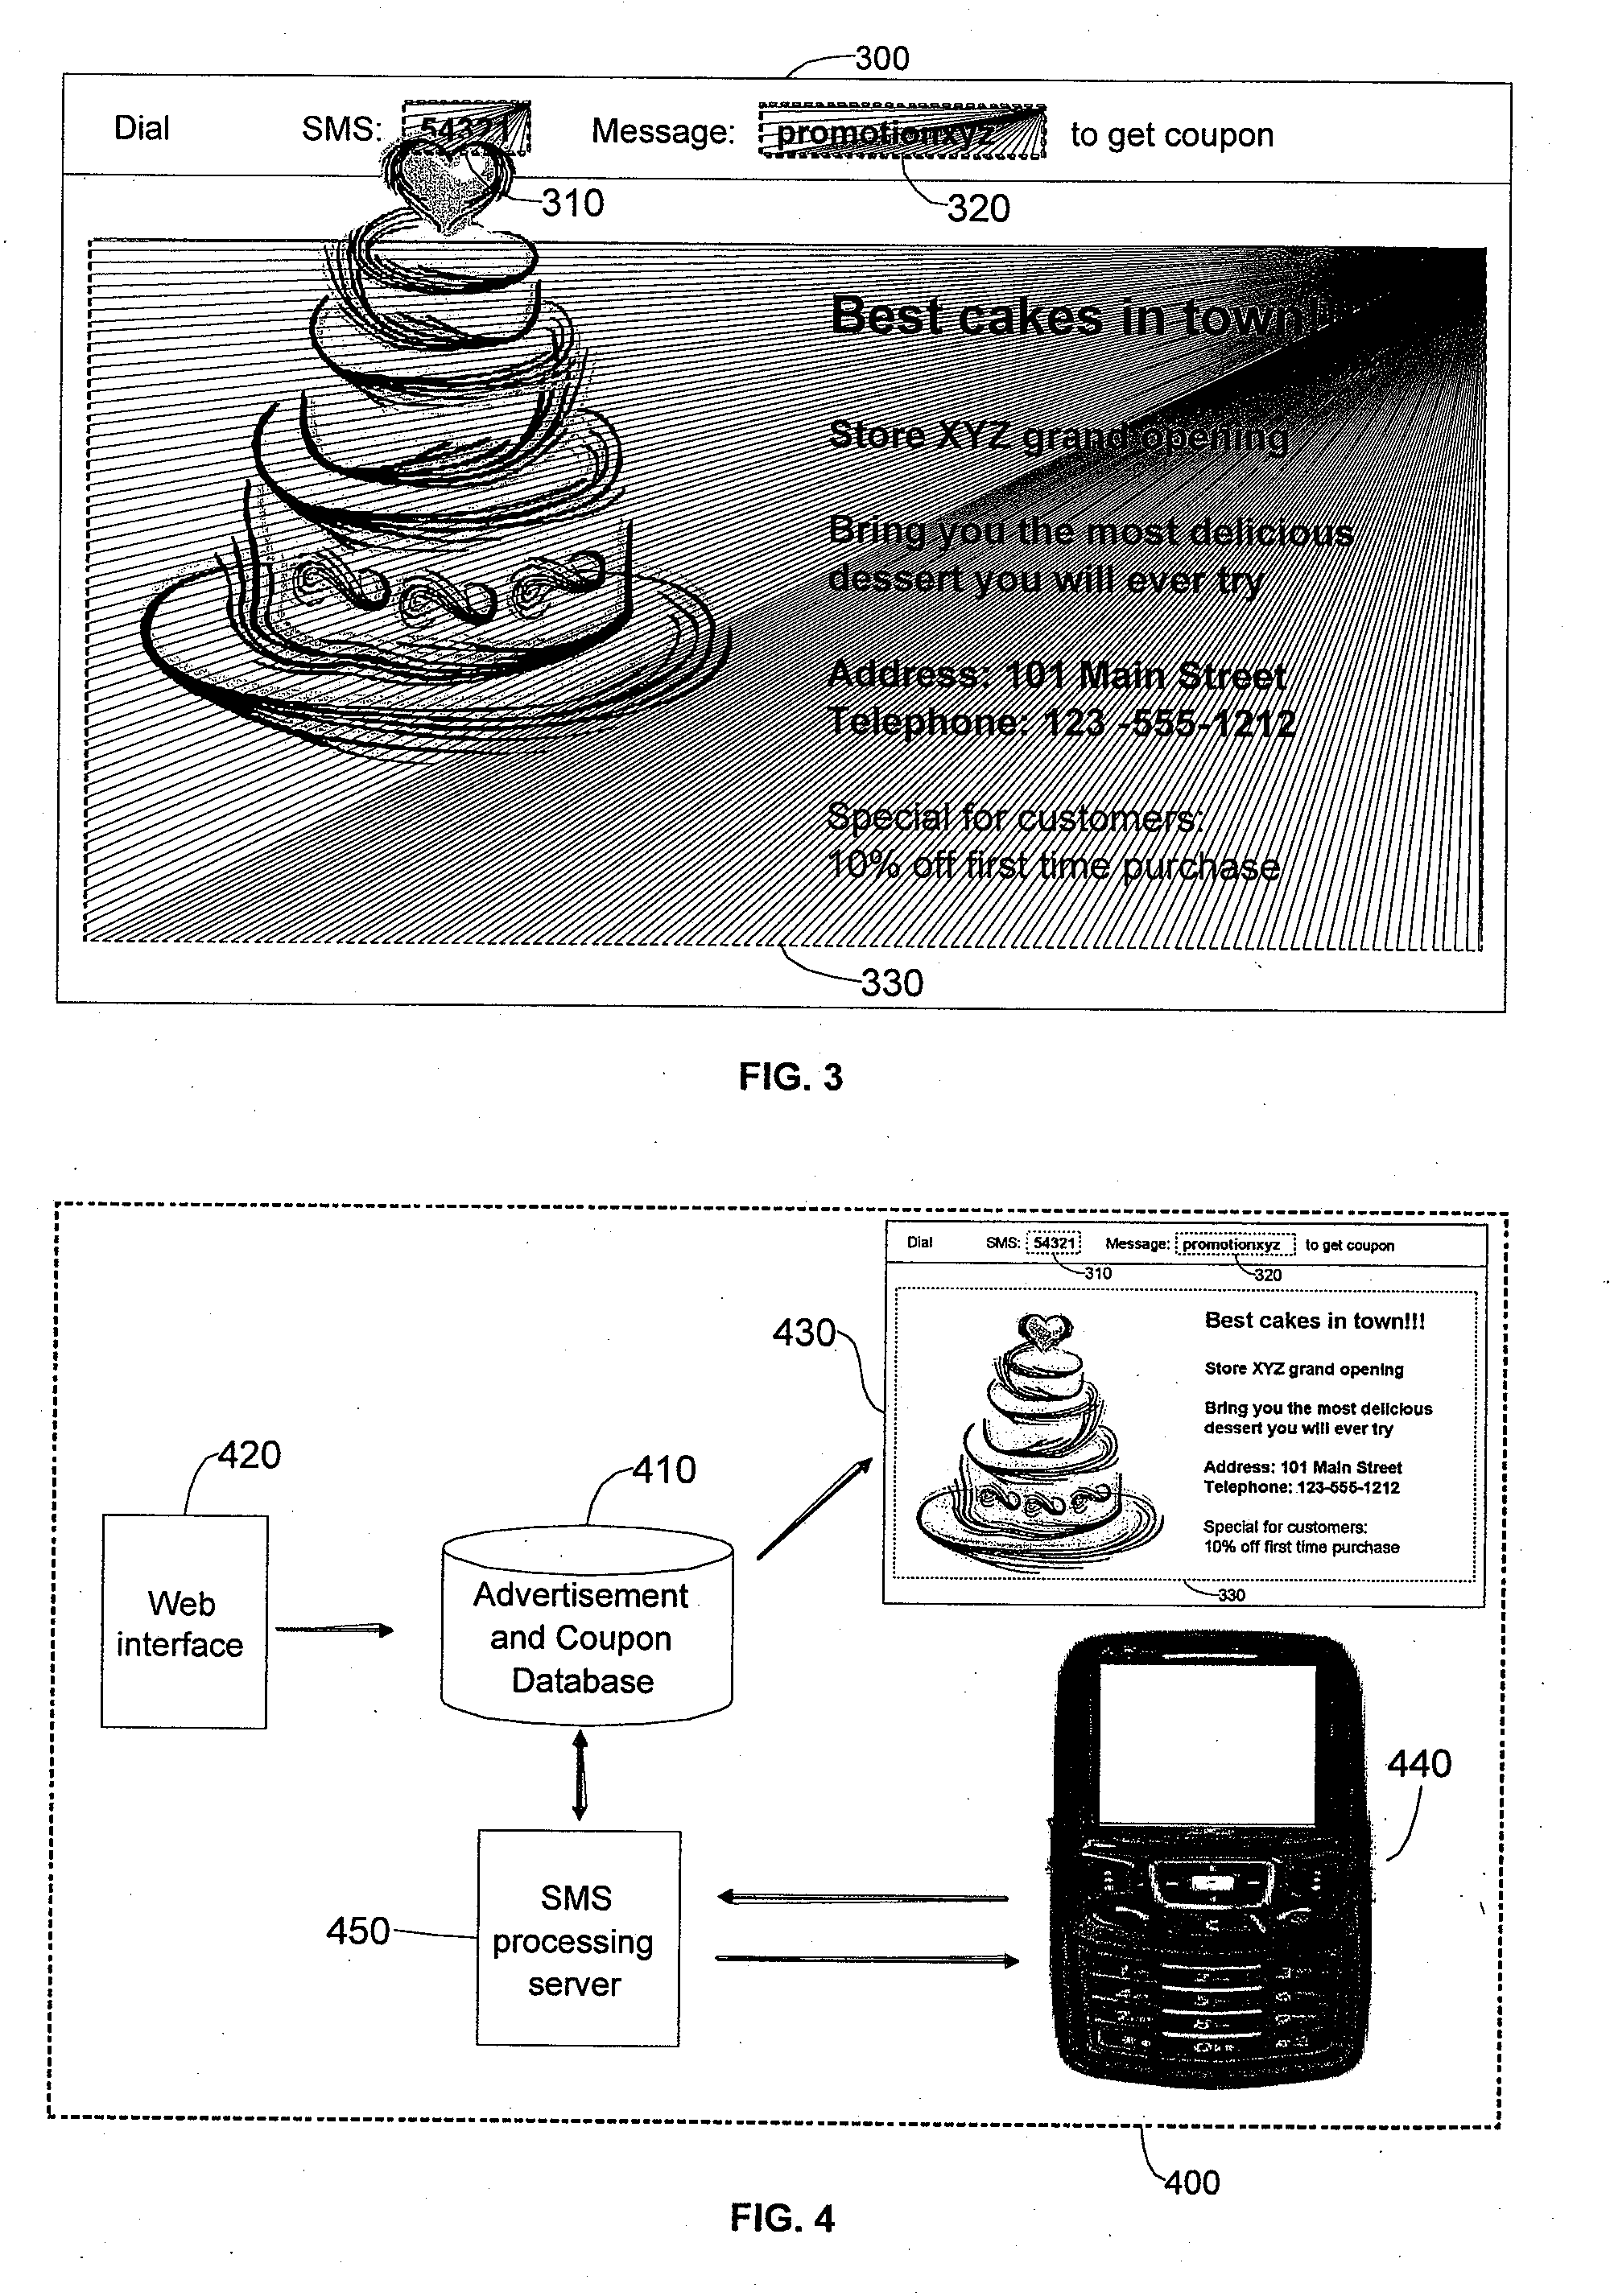 Method and Apparatus for Defining, Distributing, and Redeeming SMS and MMS Coupons